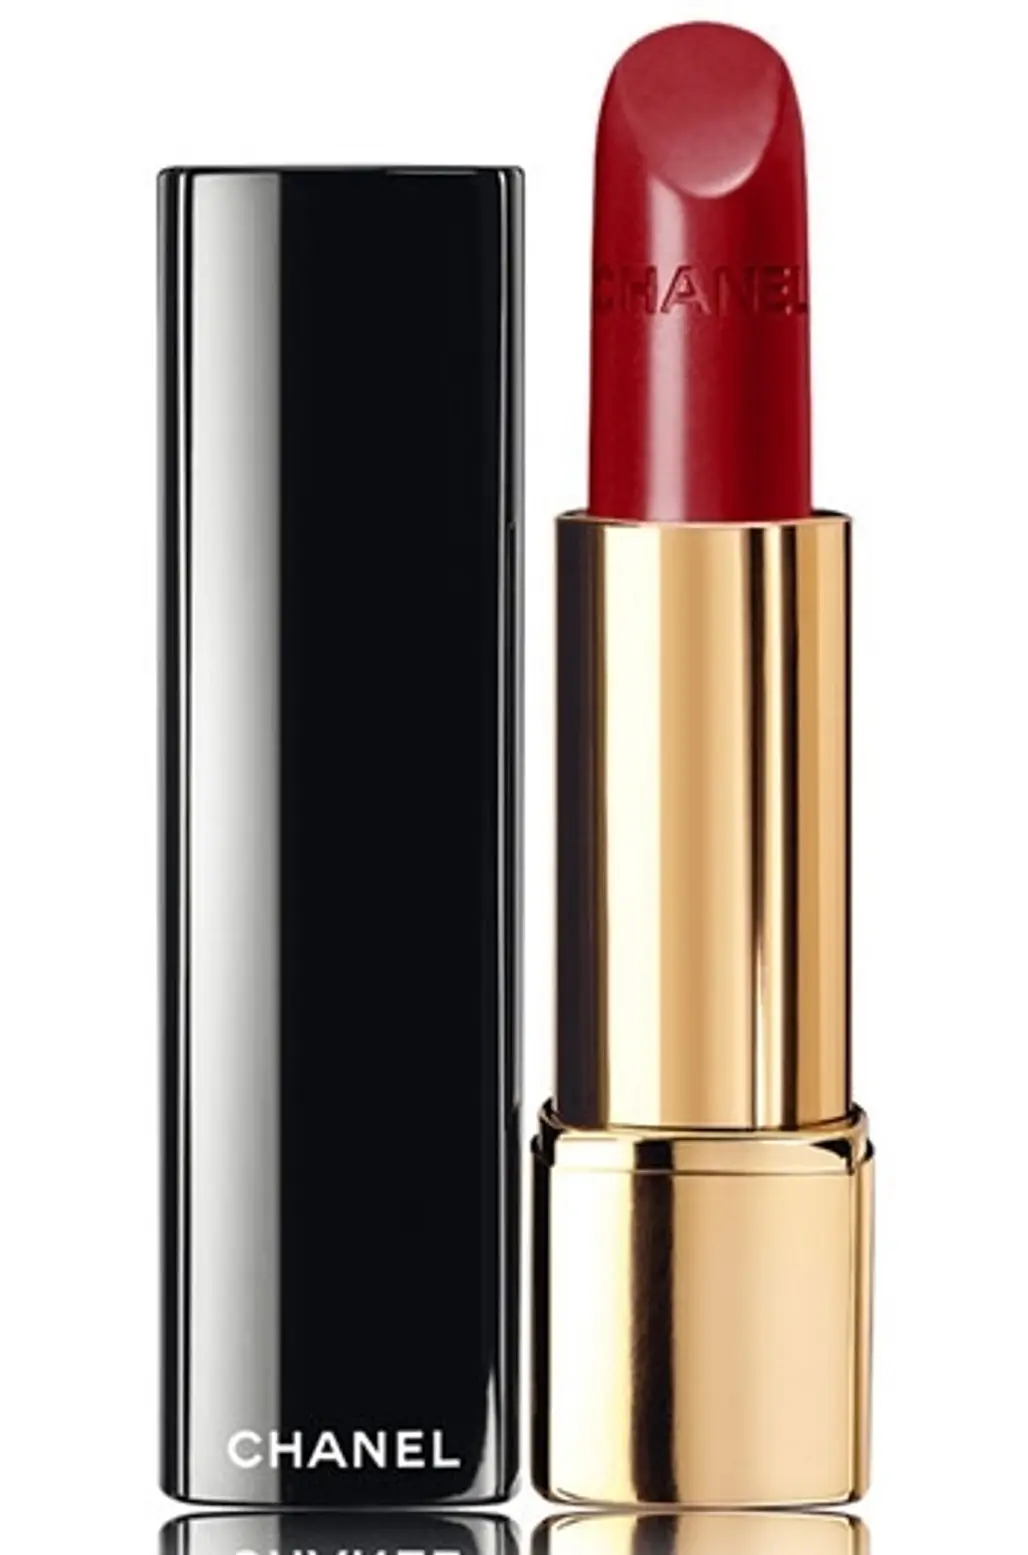 Chanel Rouge Allure Luminous Intense Lip Color in Pirate